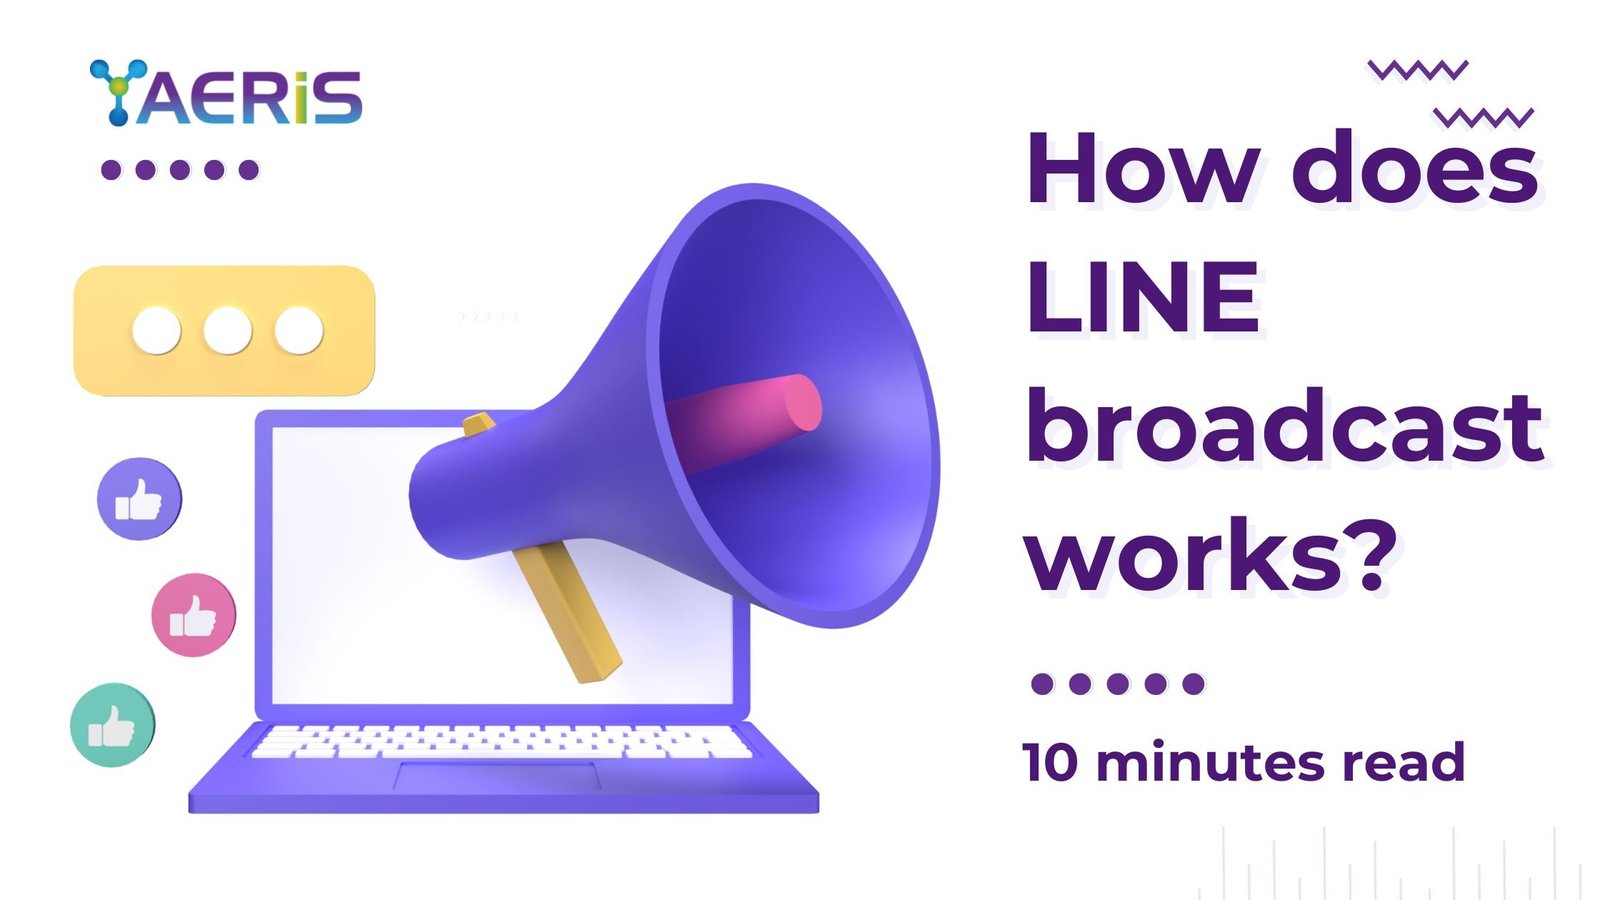 How does LINE broadcast works?